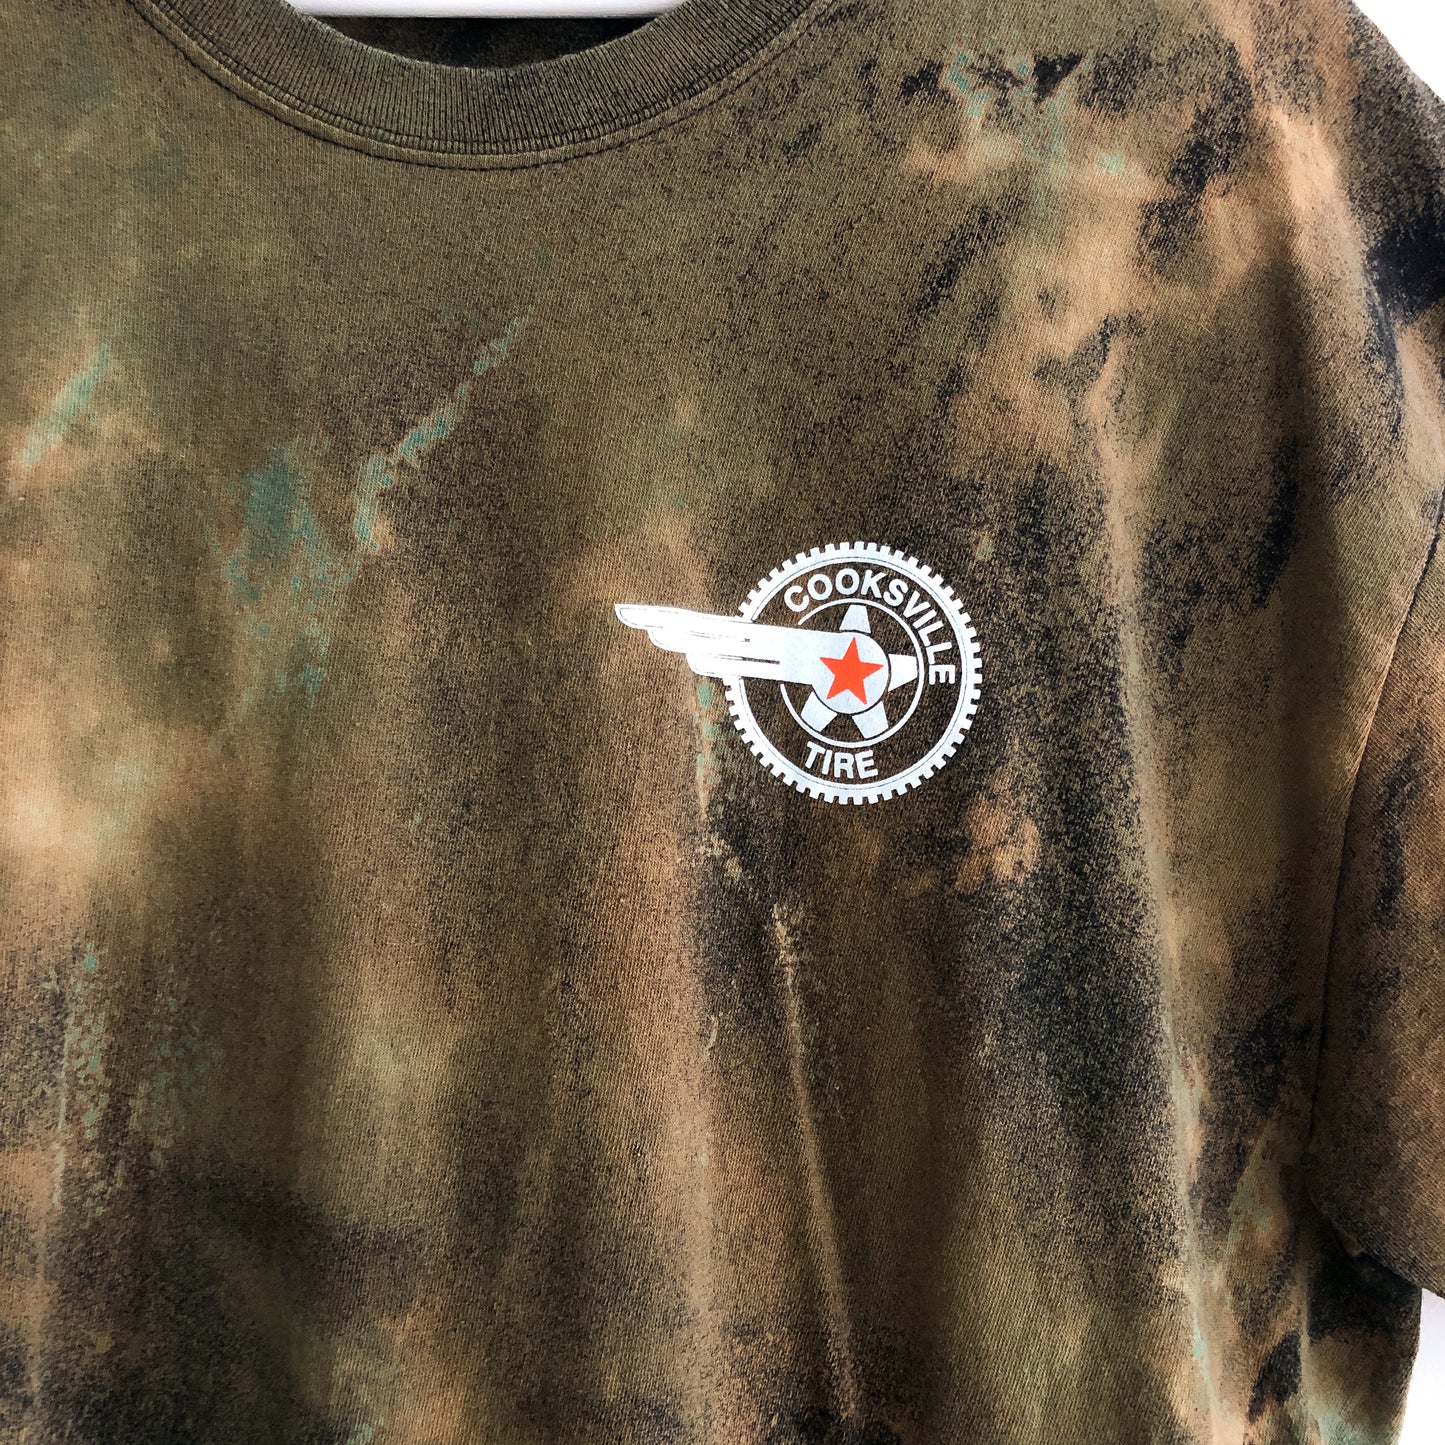 Upcycled Mossy Tire Tee